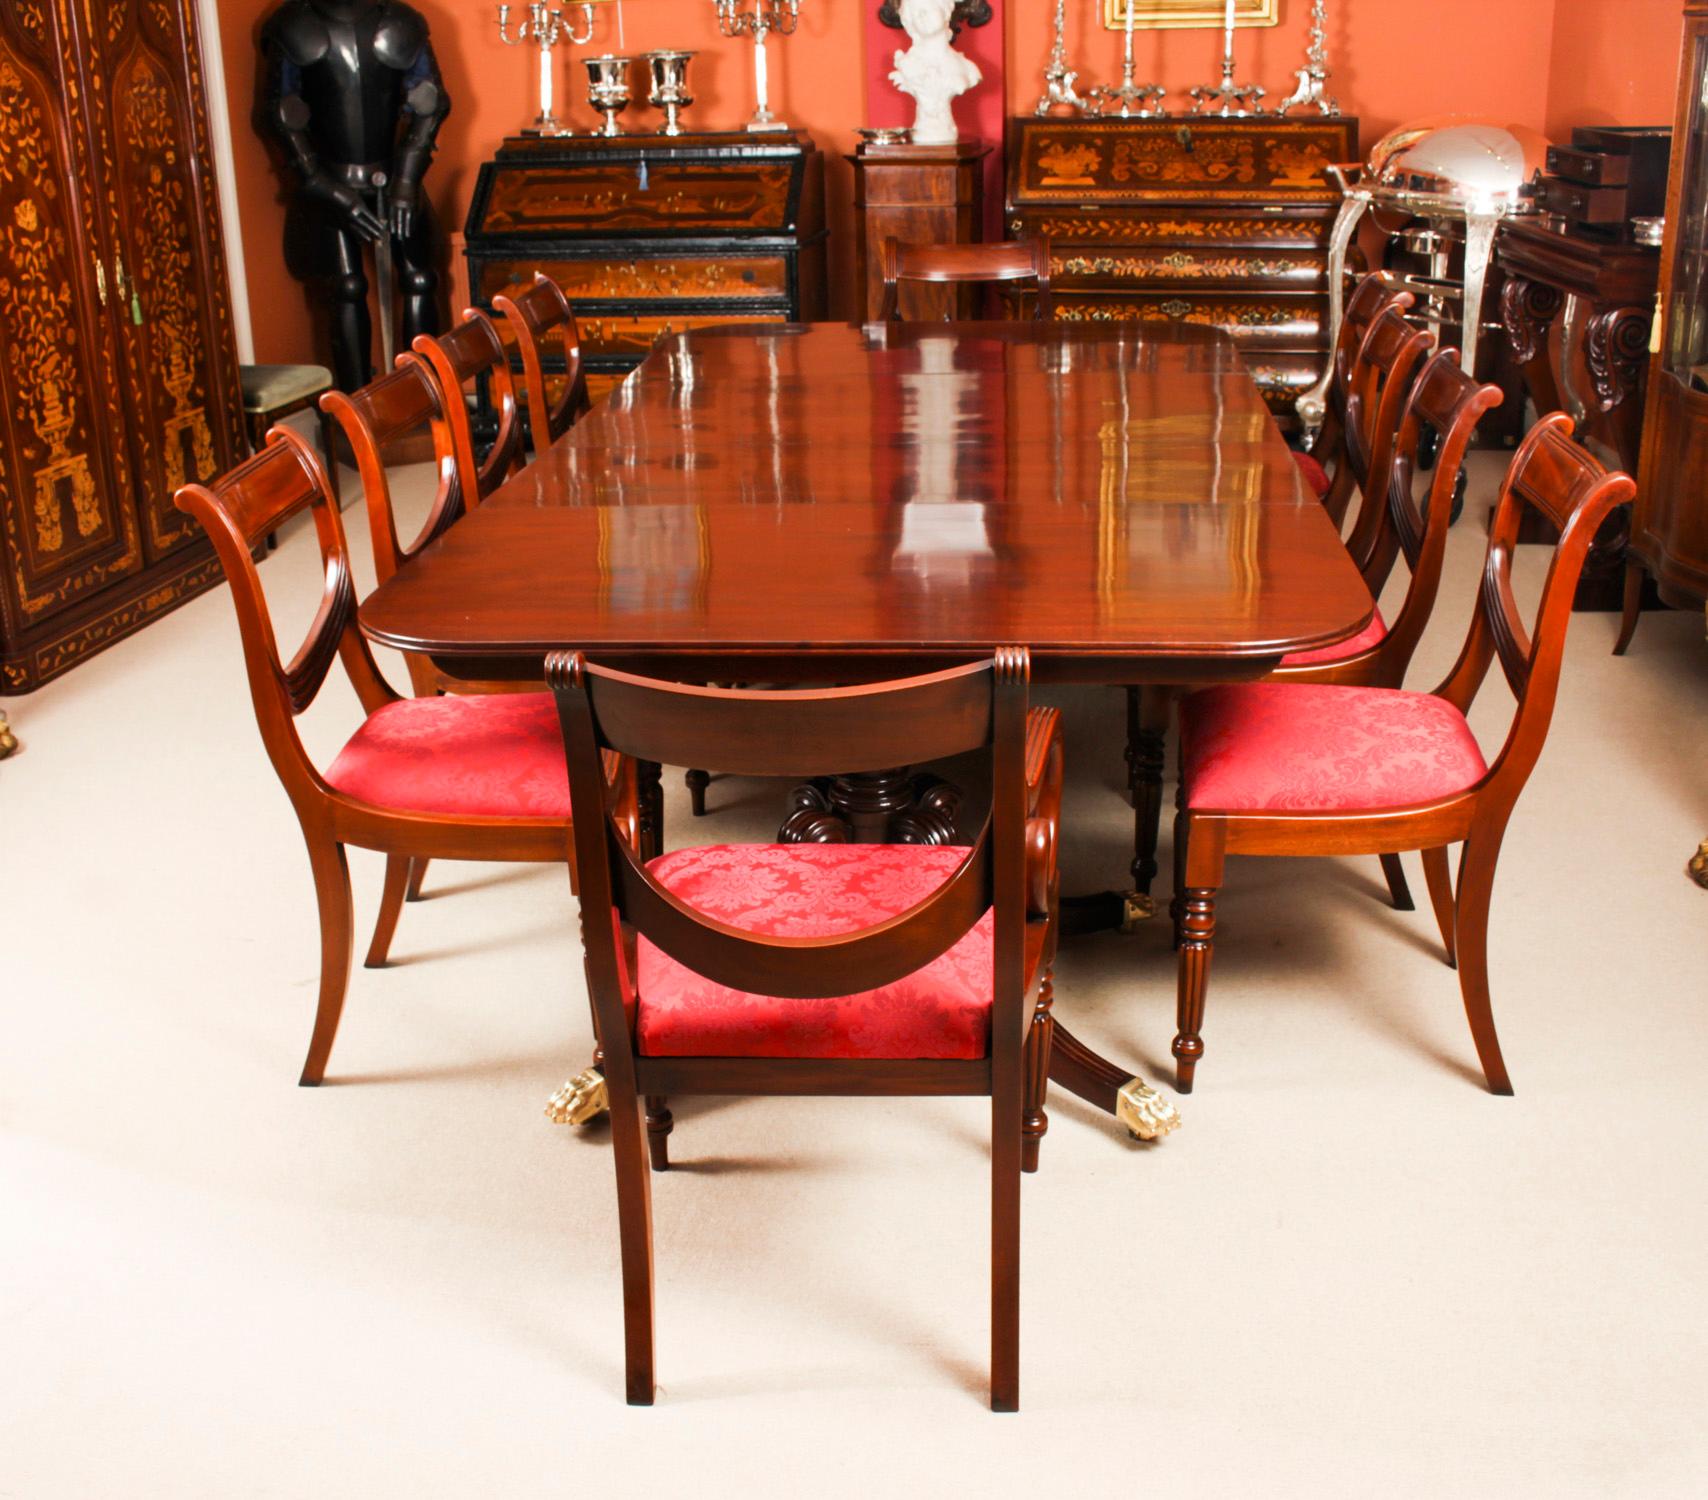 This is an elegant dining set comprising an antique Regency dining table Circa 1820 in date with a Vintage set of ten Regency Revival swag back dining chairs..

The table is of rectangular form with rounded corners and reeded edge. It is raised on